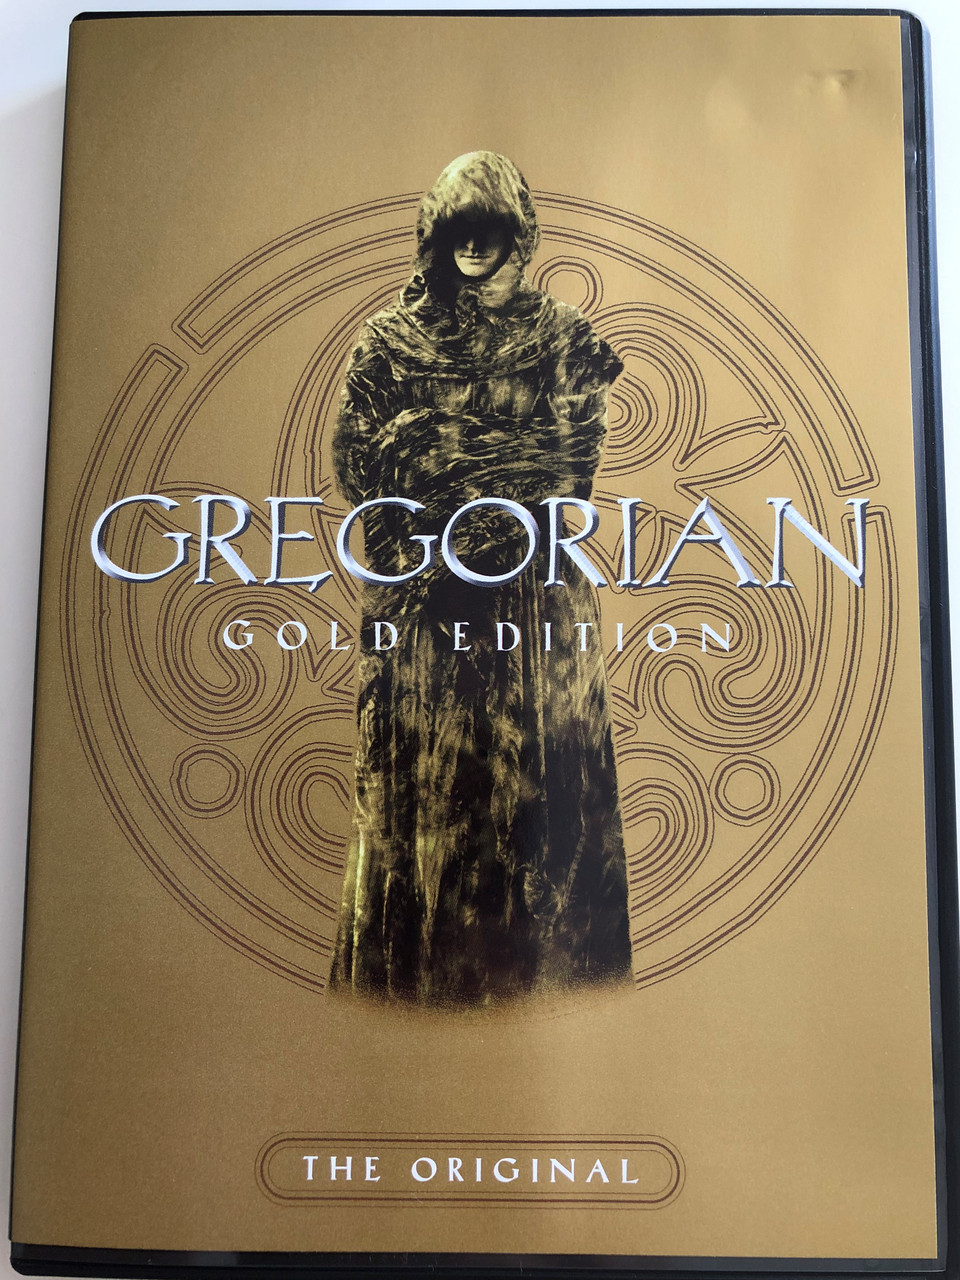 Gregorian DVD 2003 Gold edition - The Original / I Still Haven't found what  I'm looking for, In the Air Tonight, Only You, Angels / Edel Records /  0152158ERE - bibleinmylanguage